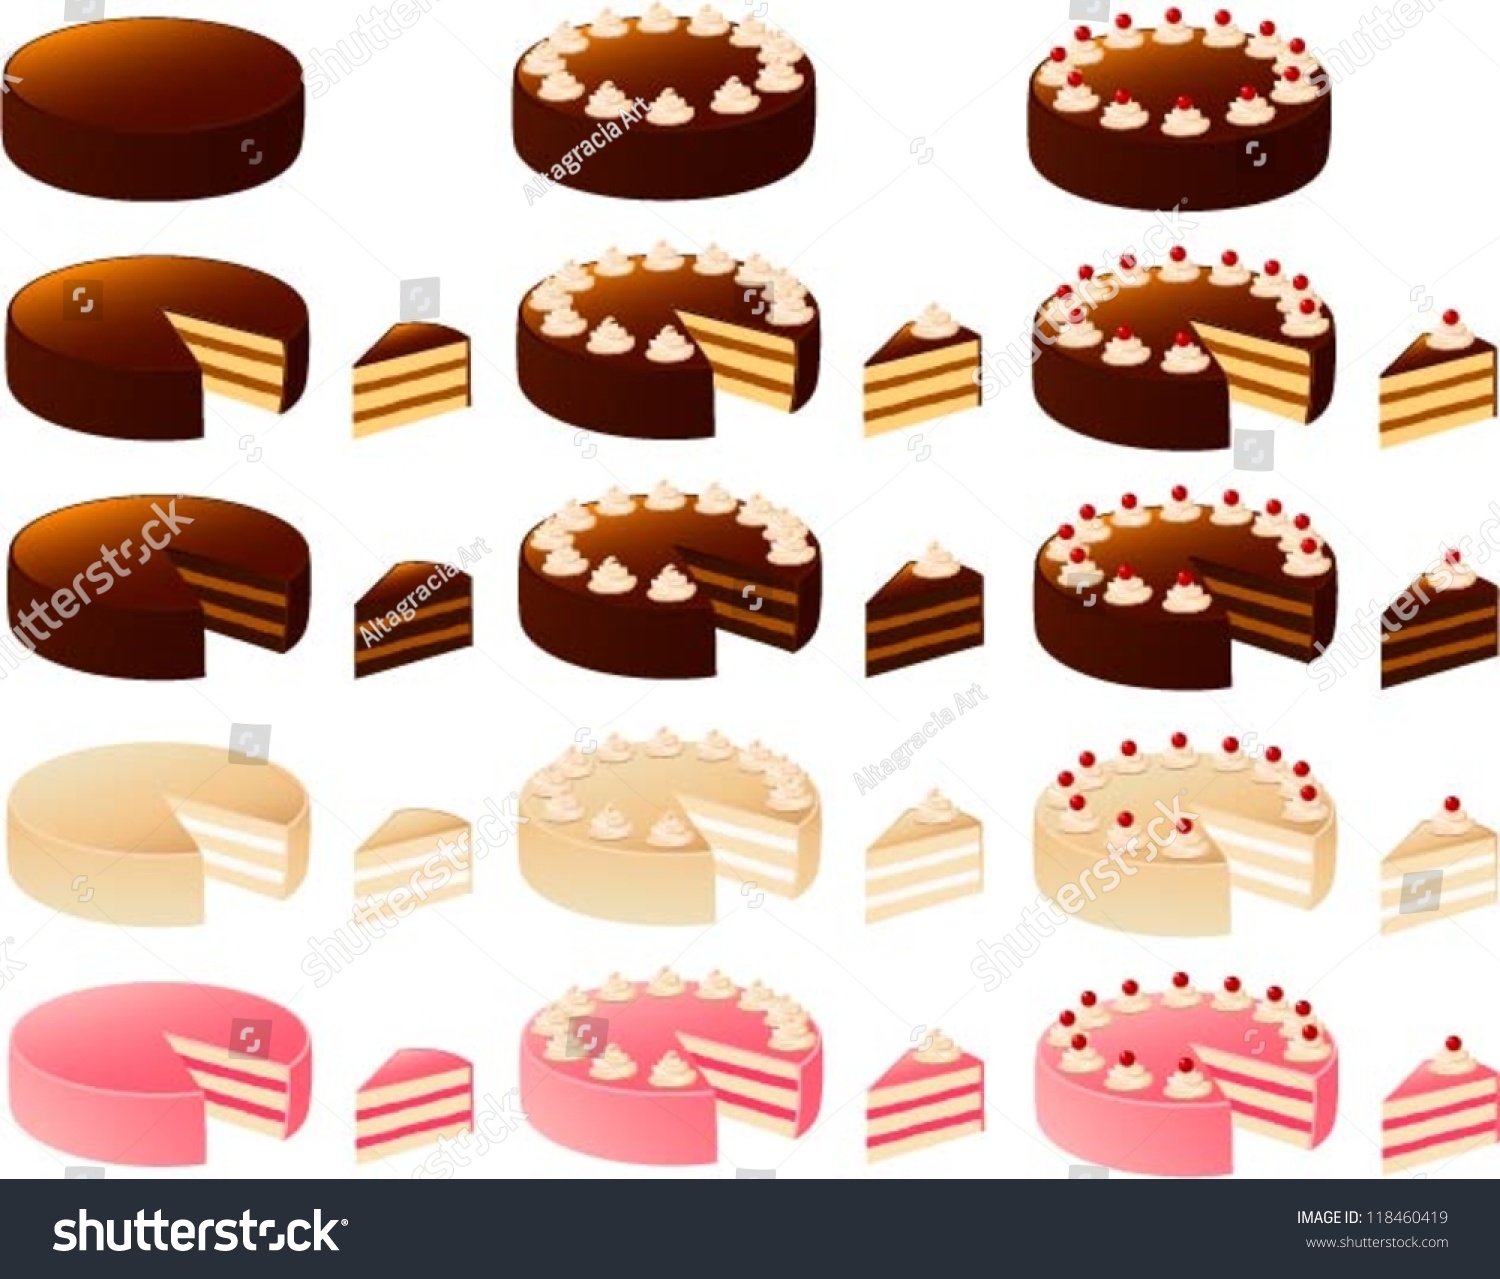 SVG of Vector illustration of various cakes. svg